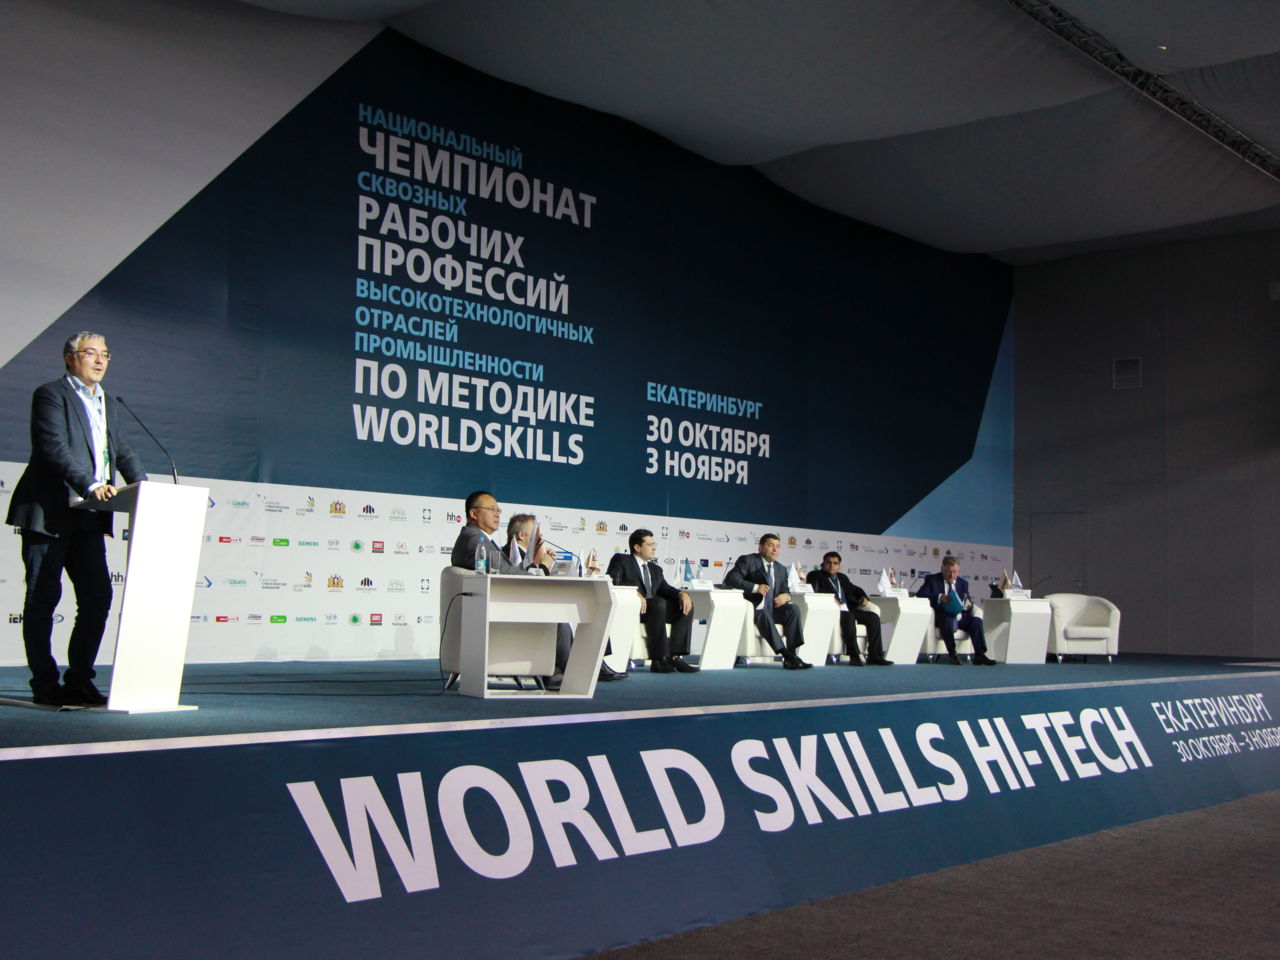 “Competence Growth 2035” at the WorldSkills Russia Hi-Tech Competition